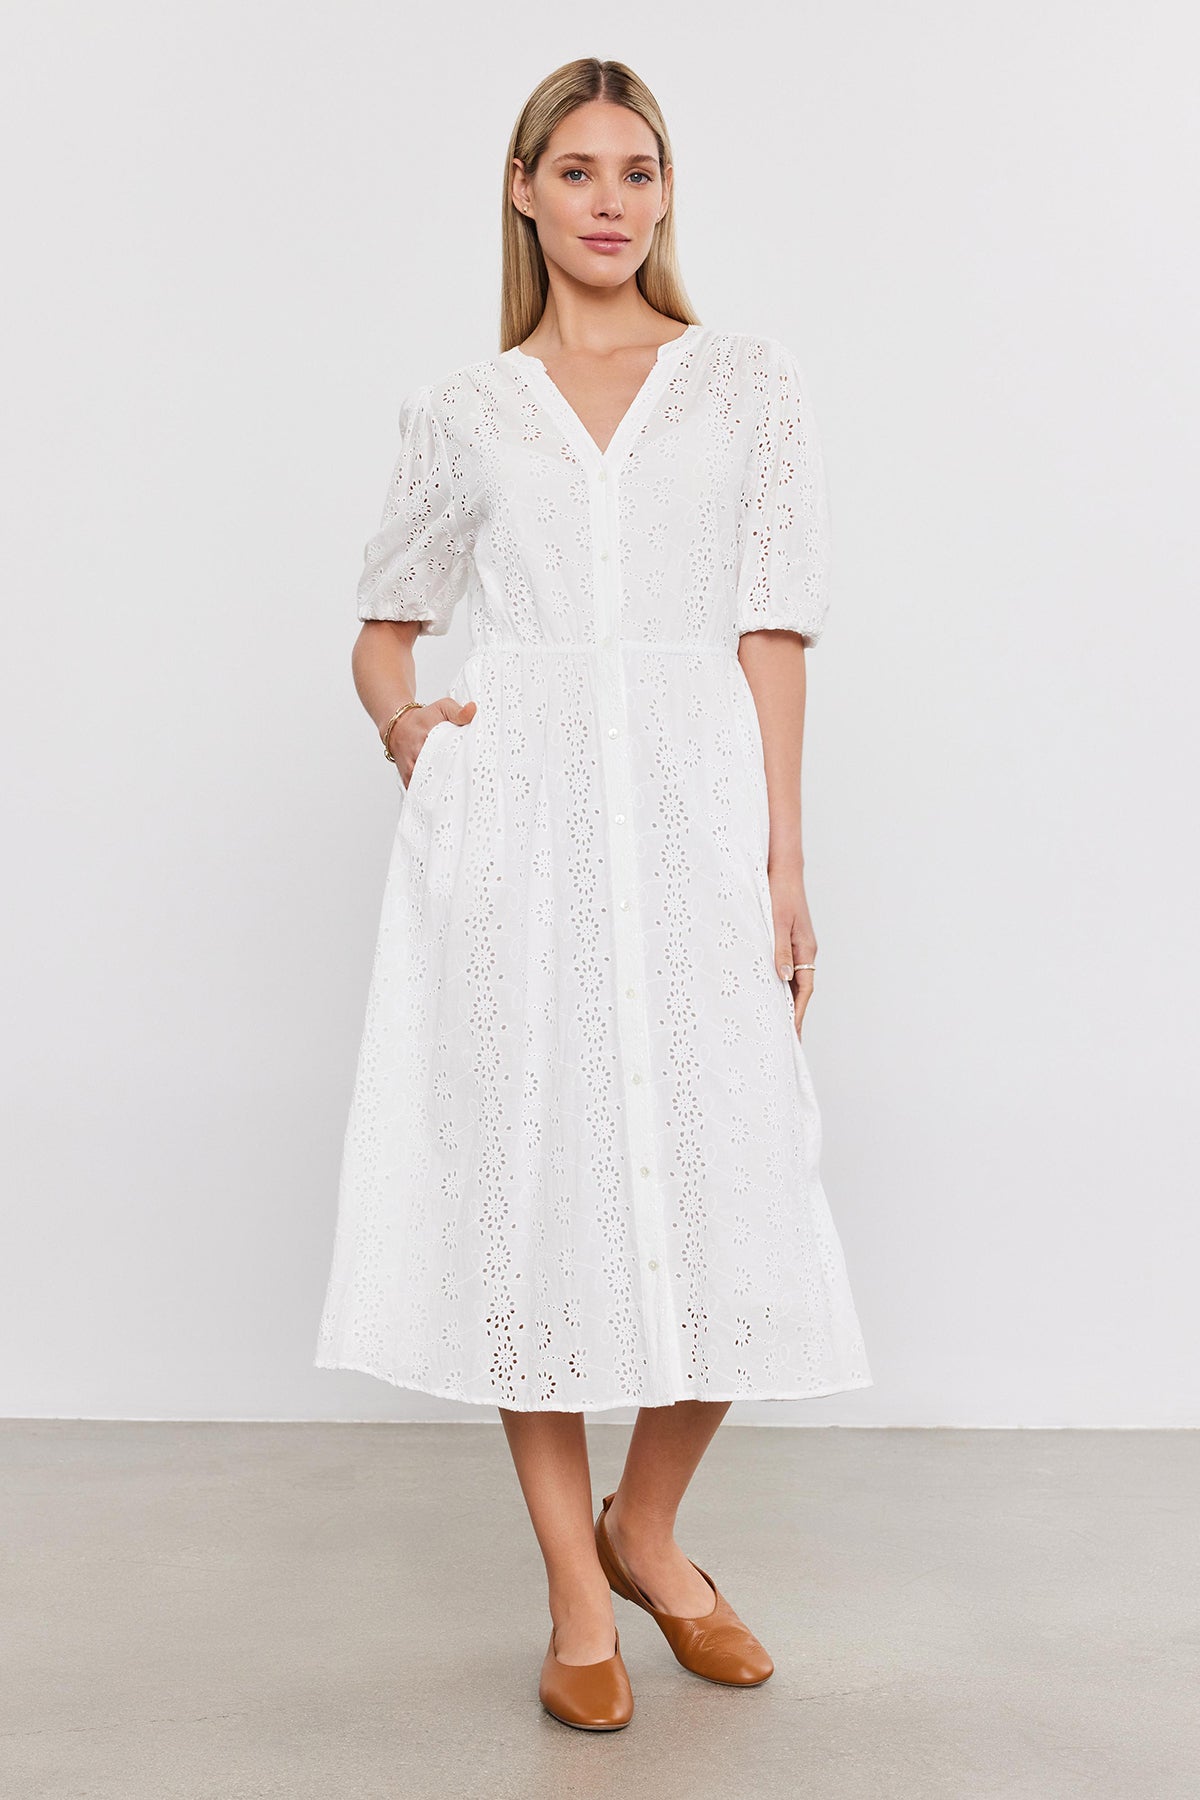 A woman stands in a studio wearing a white cotton eyelet midi dress with puff sleeves, paired with brown leather flats - the Velvet by Graham & Spencer RORI DRESS.-36910267924673